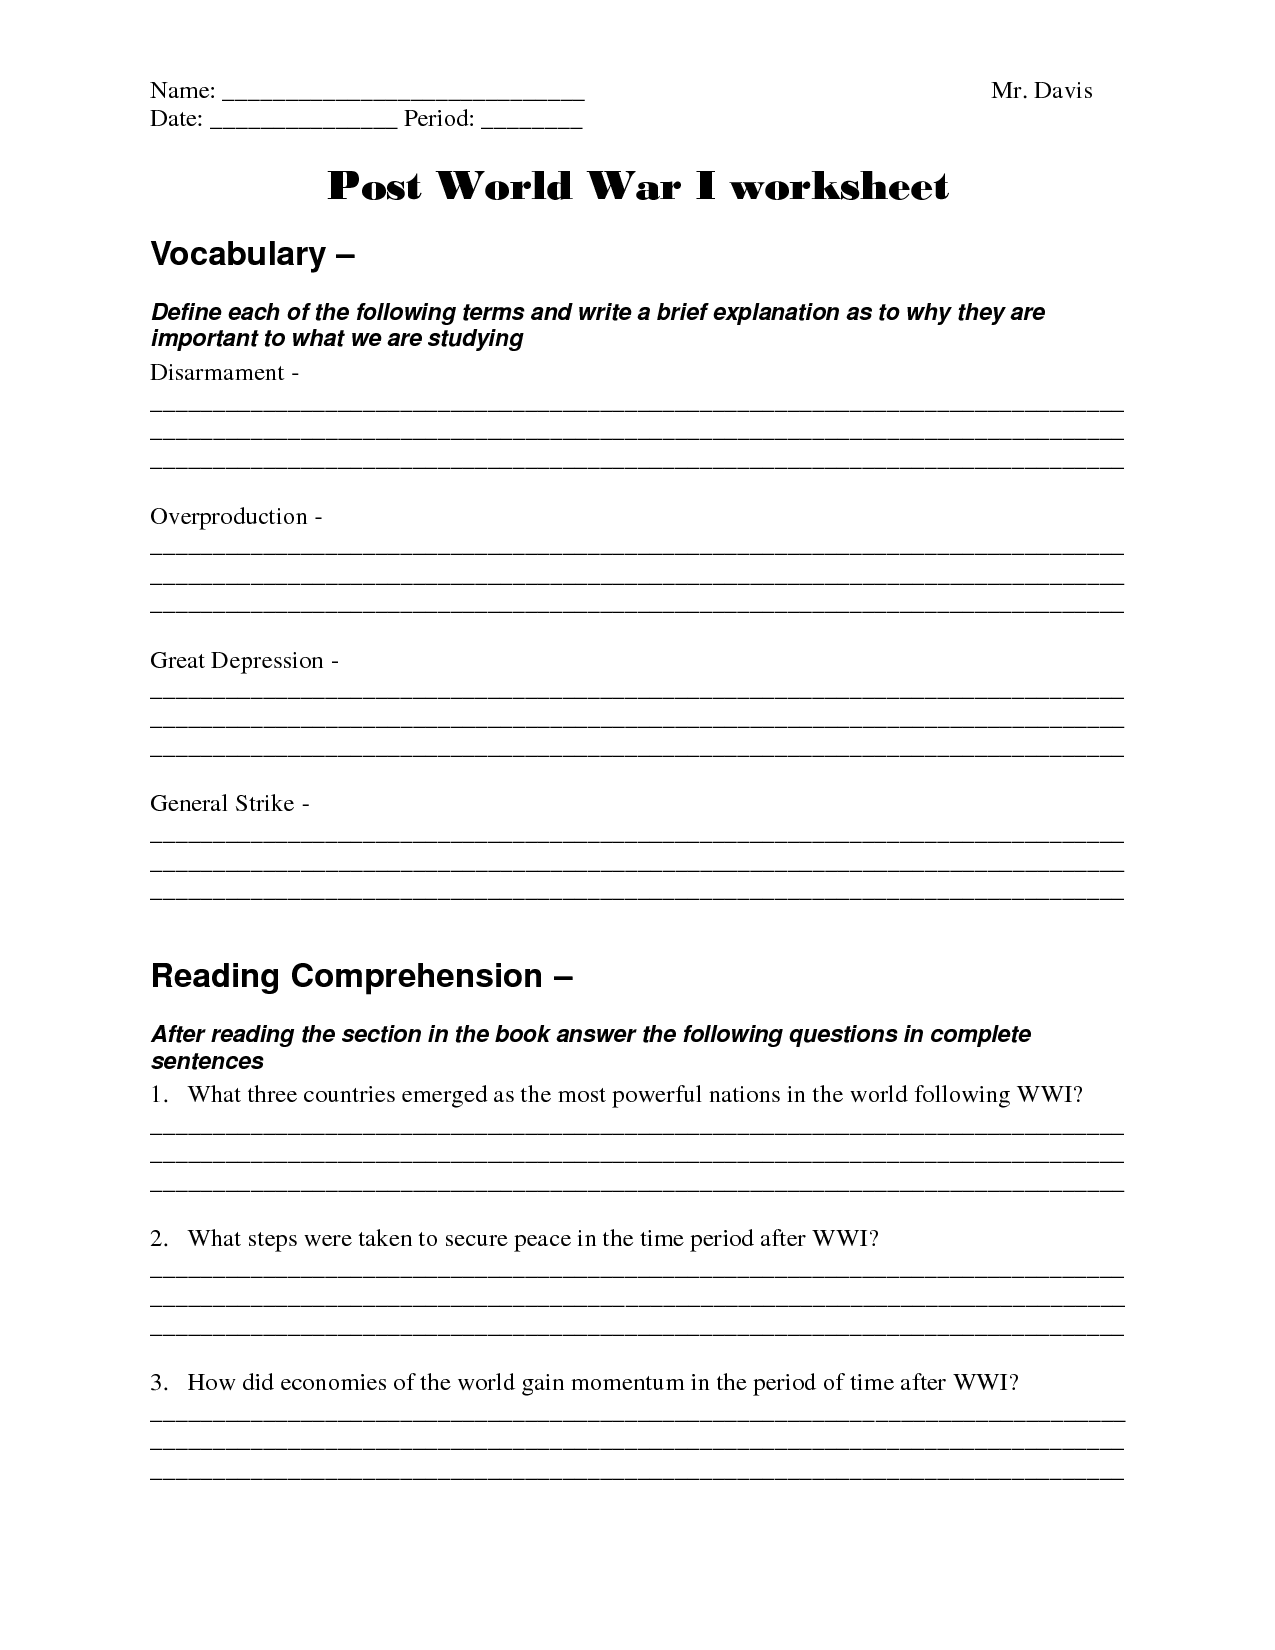 wwii-causes-worksheet-driverlayer-search-engine